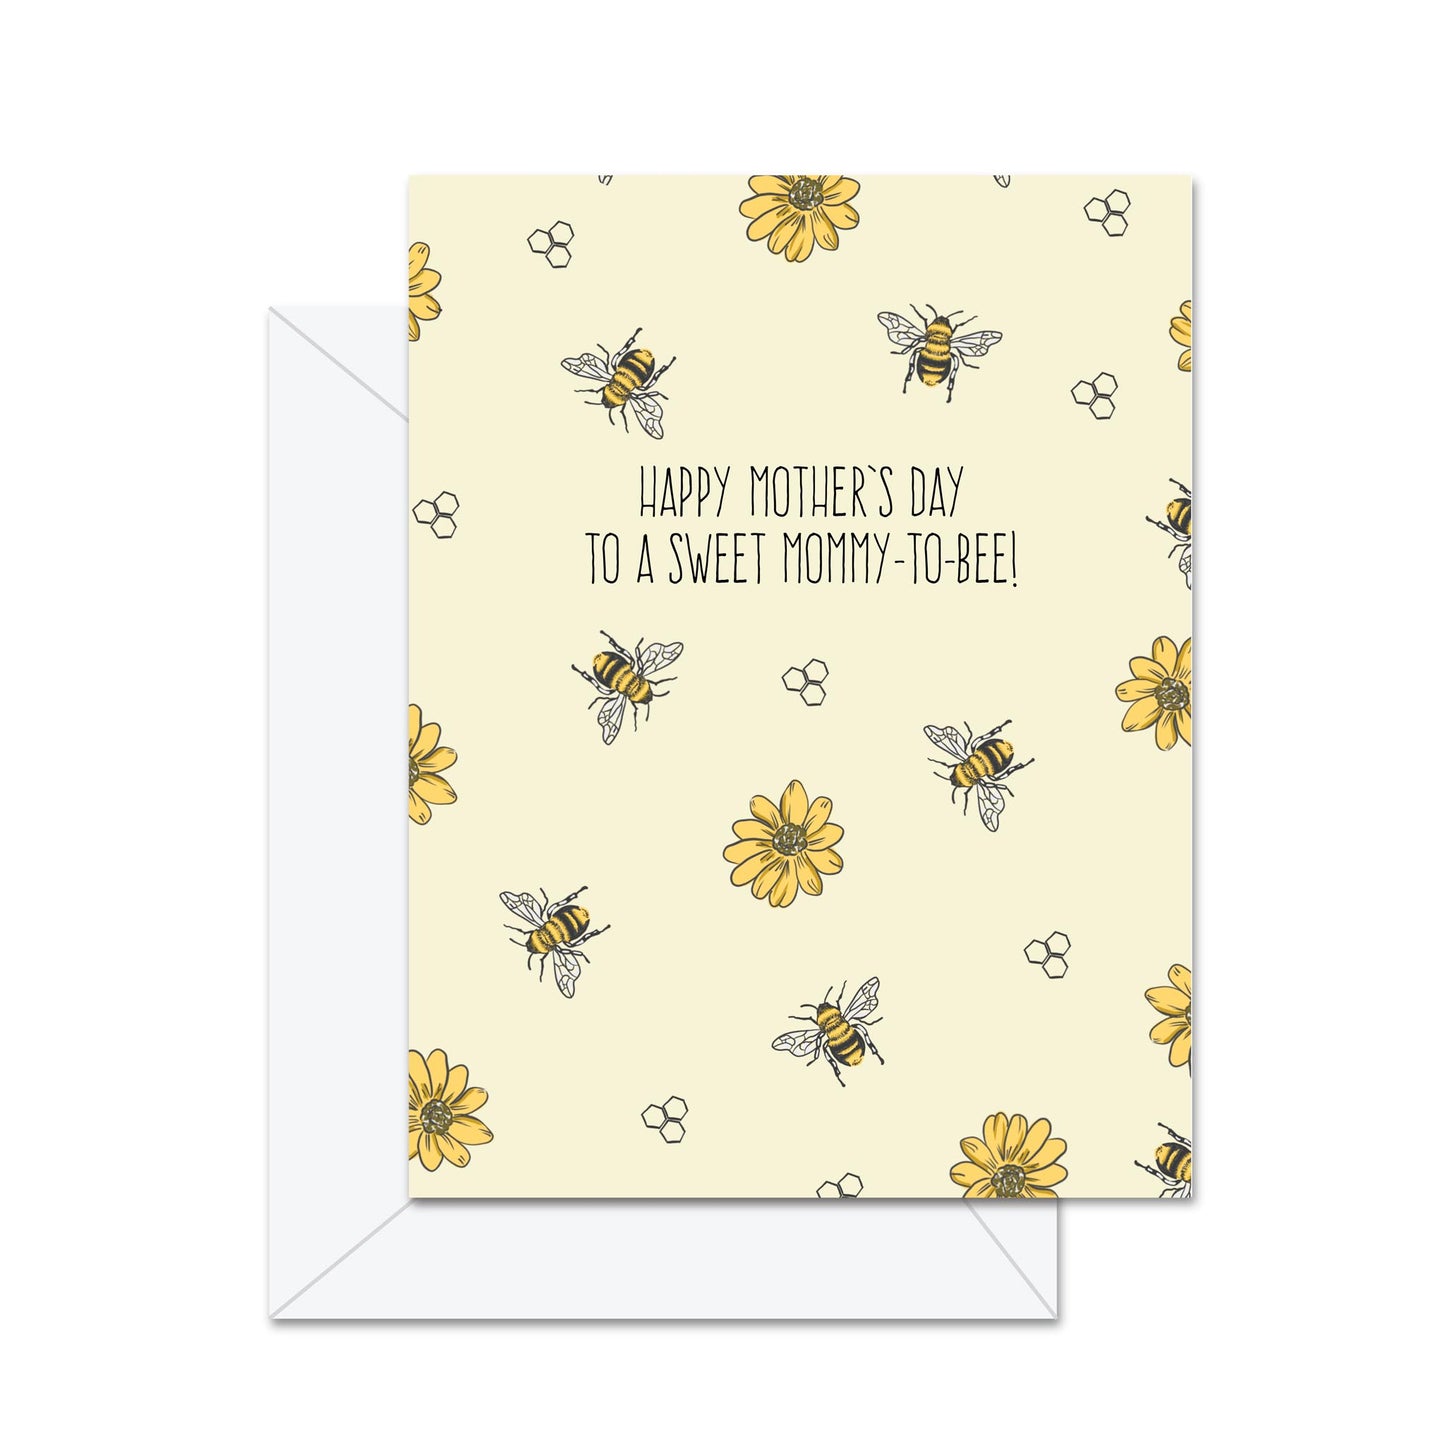 Happy Mother's Day to A Sweet Mommy-To Bee! - Greeting Card